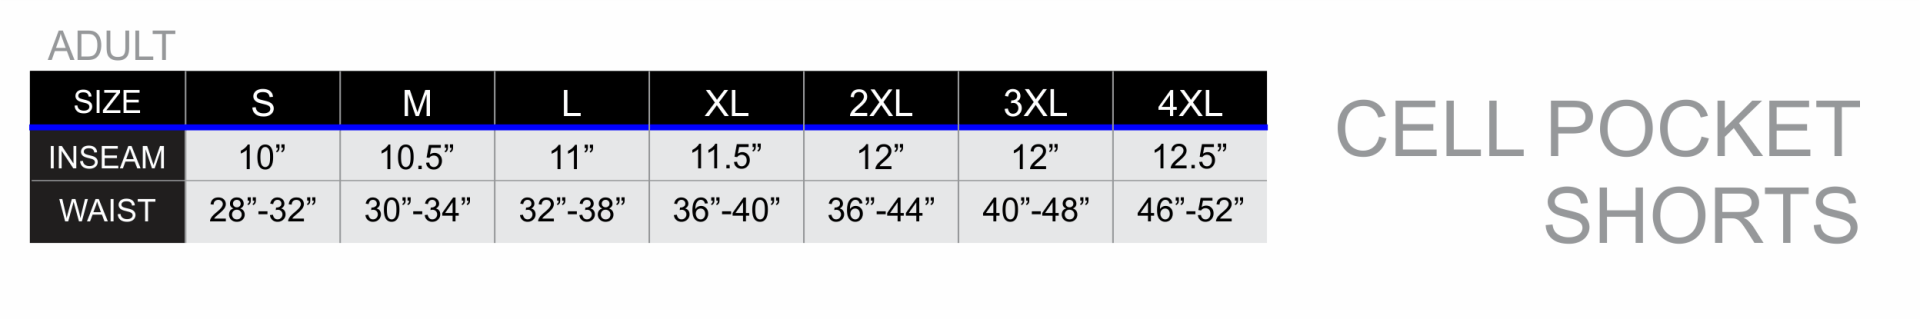 All over print cell pocket shorts sizing chart zexez